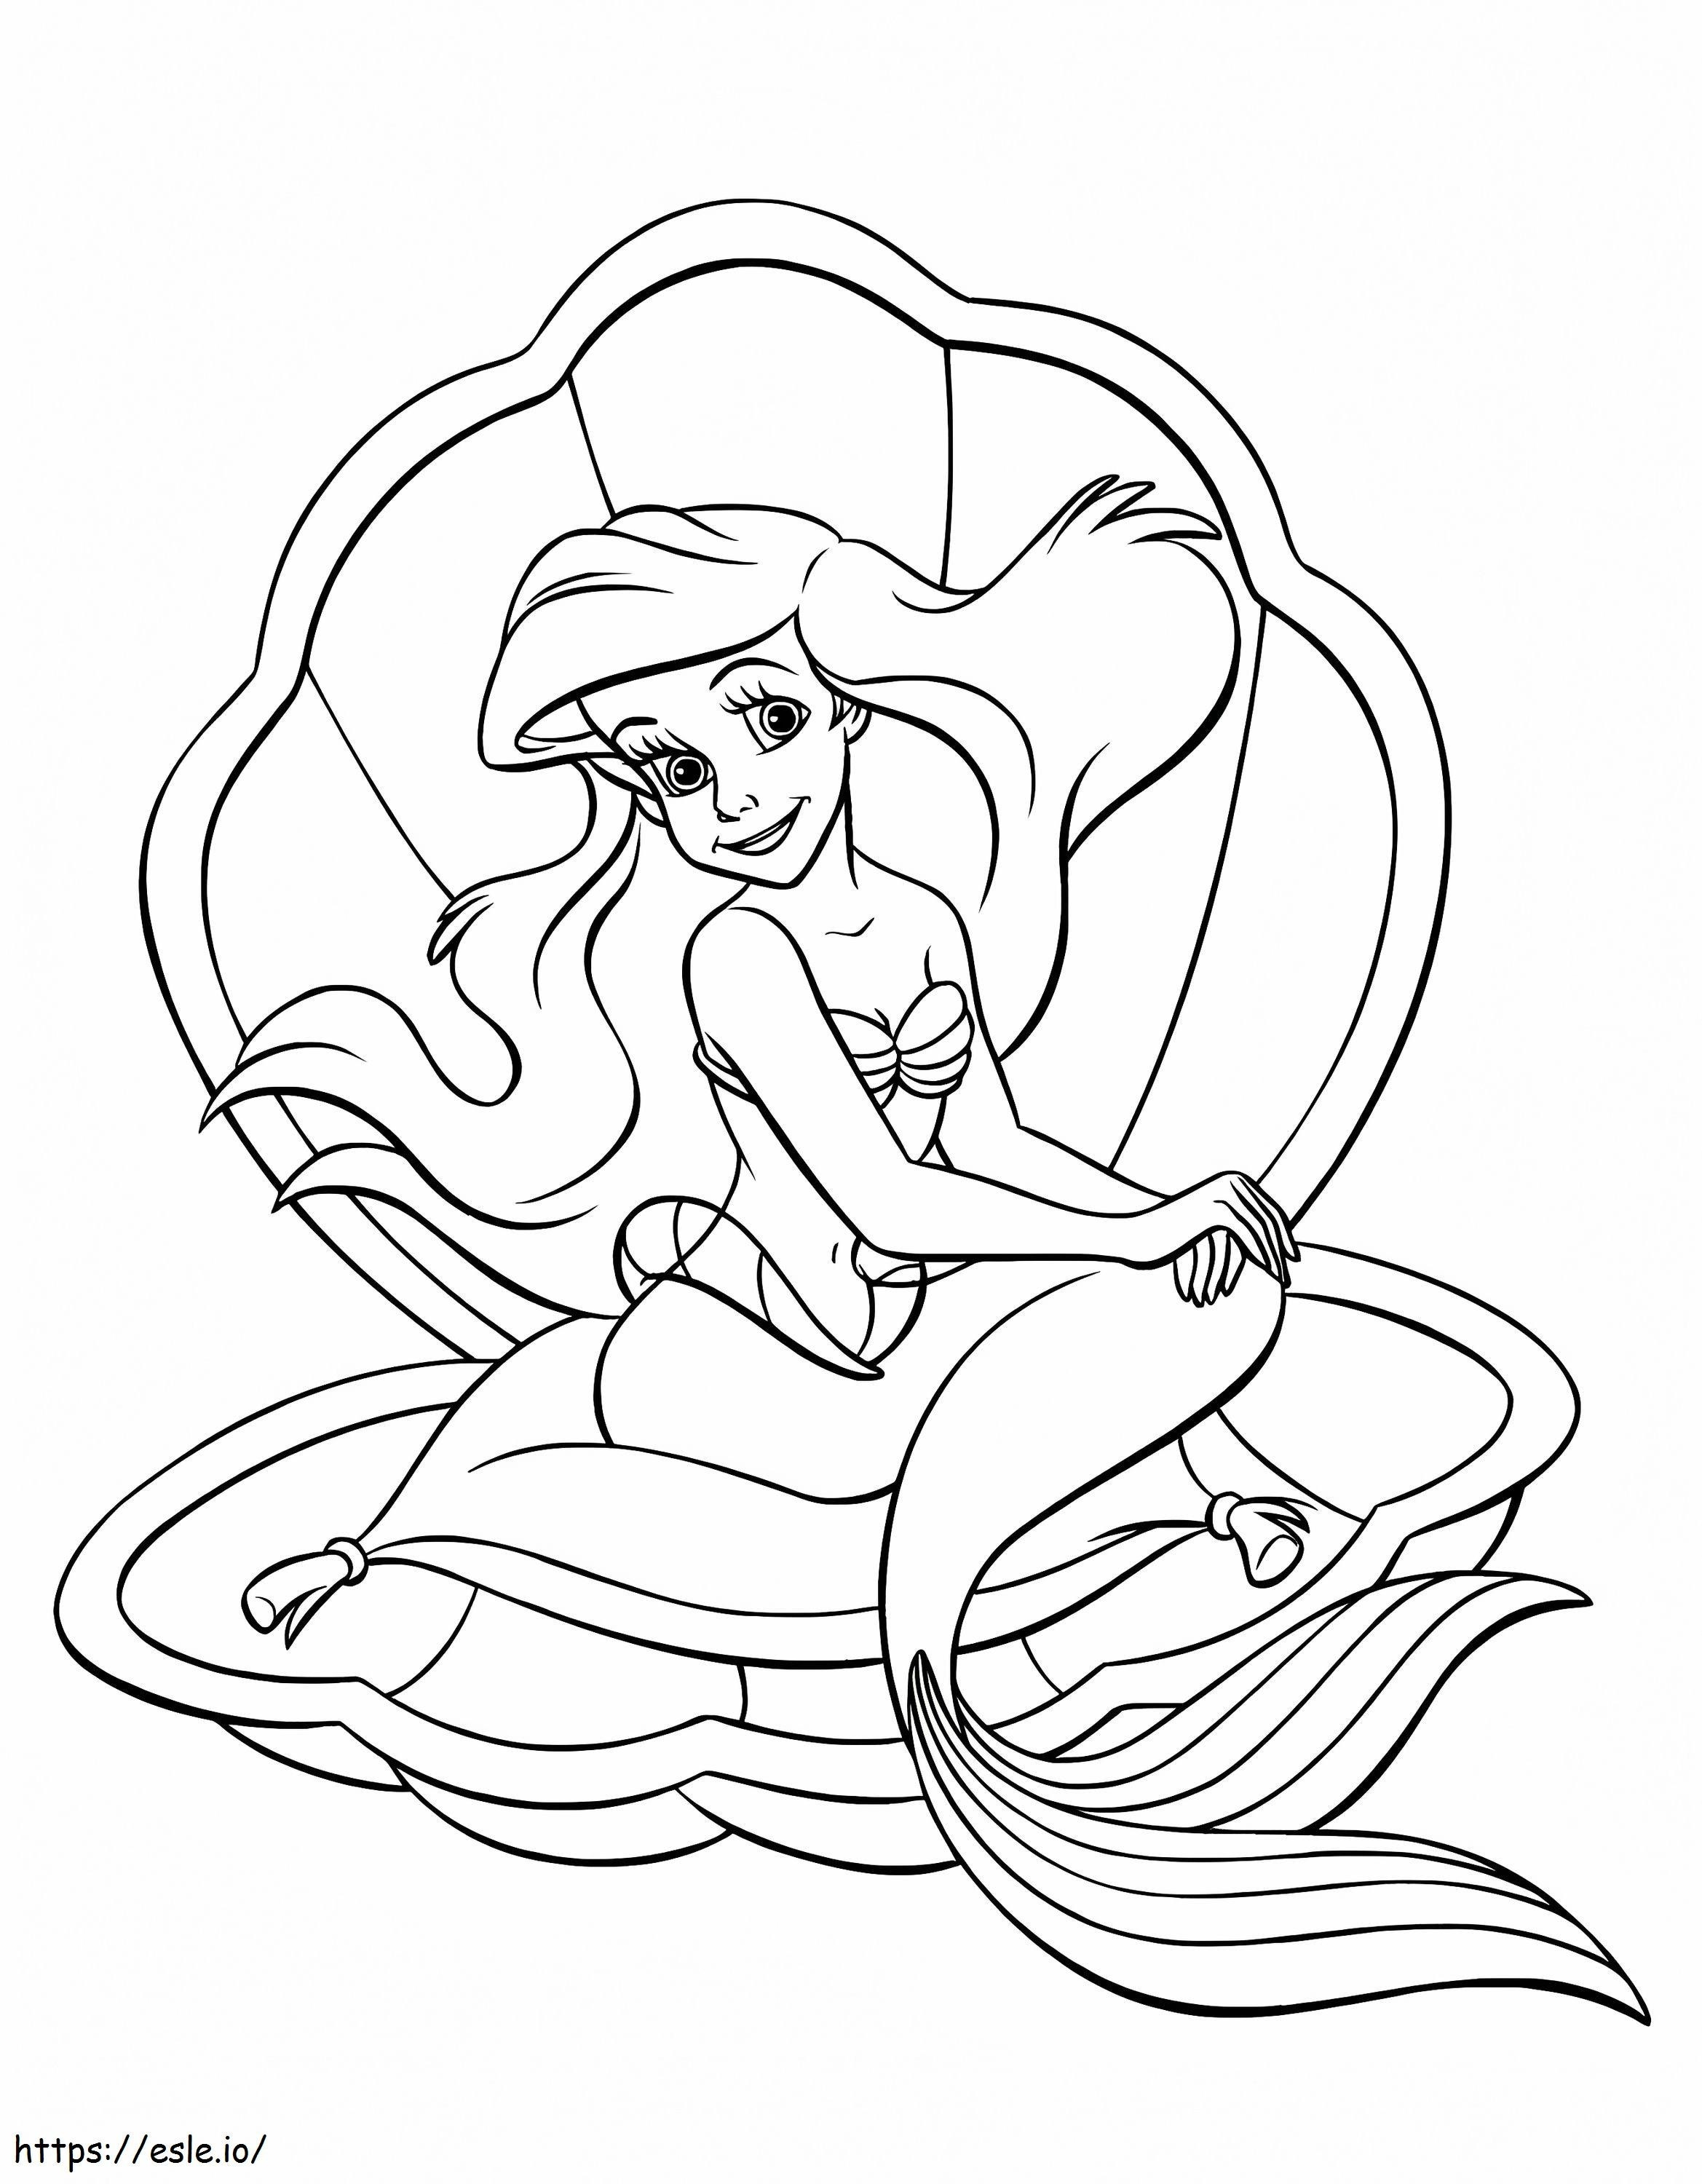 Dfgg coloring page